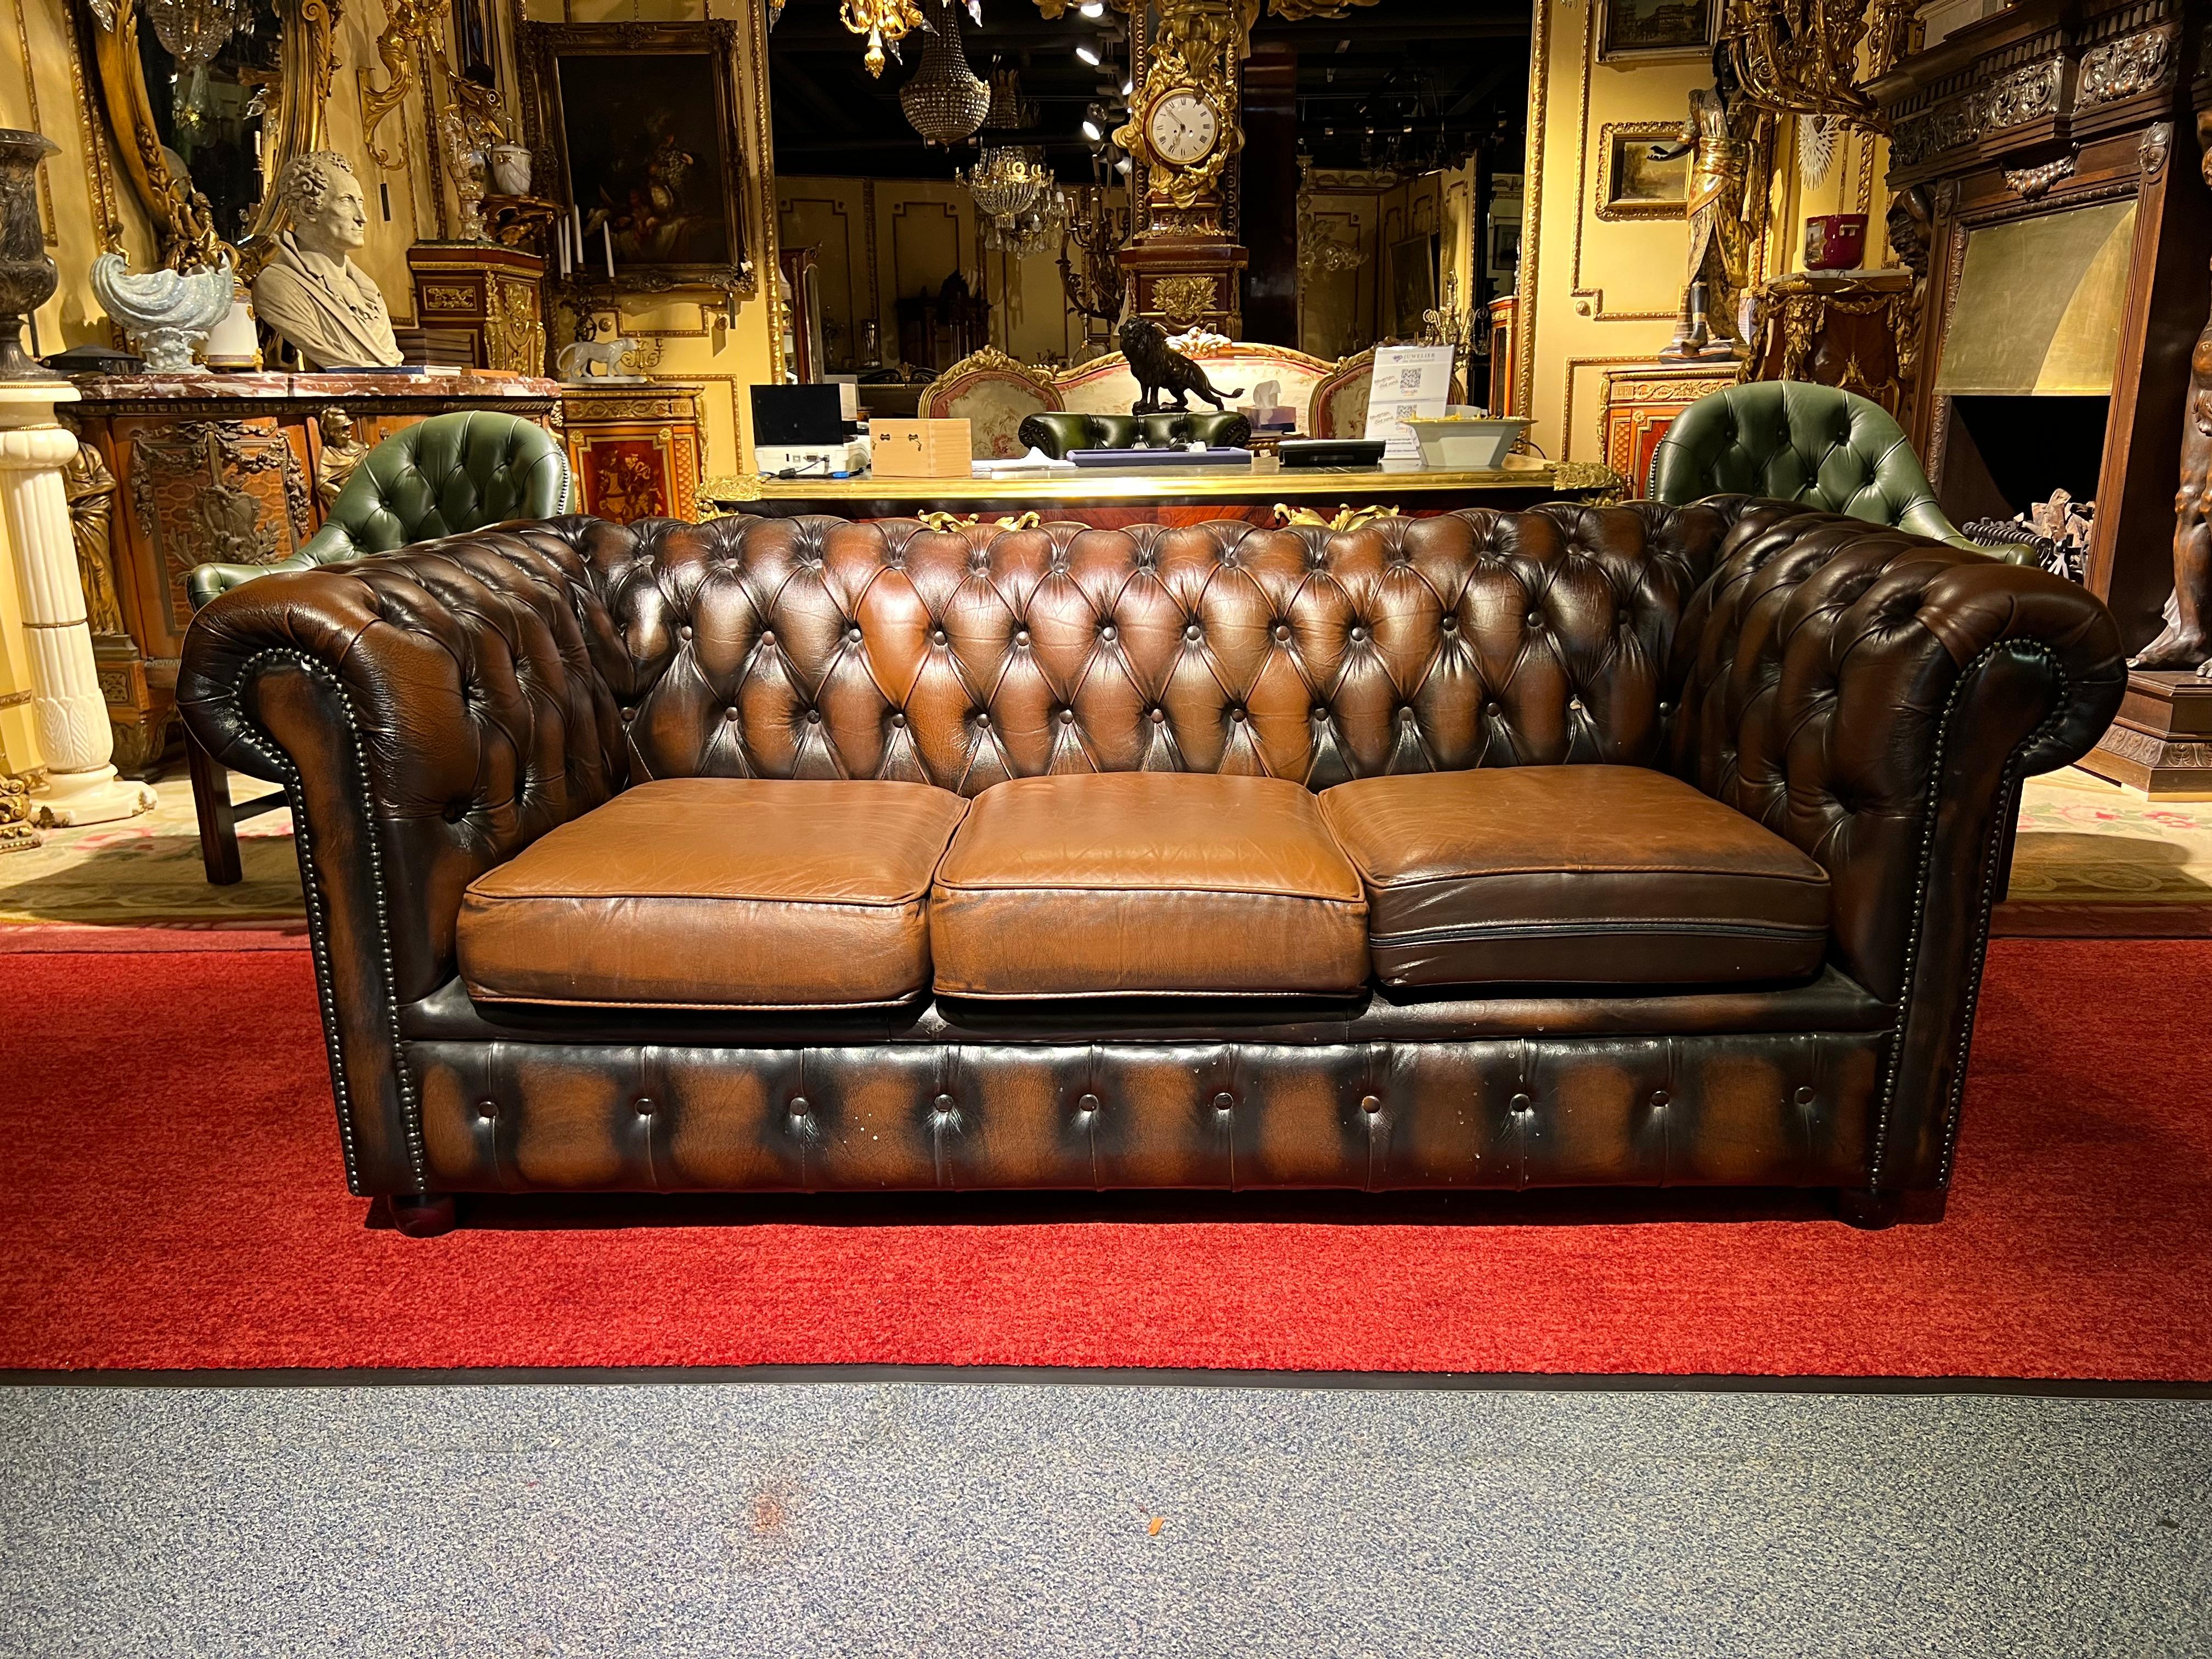 We are delighted to offer this stunning rare handmade in England brown leather 3-seat, sofa. Where to begin! This sofa is absolute eye candy from every angle, it has the original leather hide, it has been hand dyed this lovely and bespoke brown